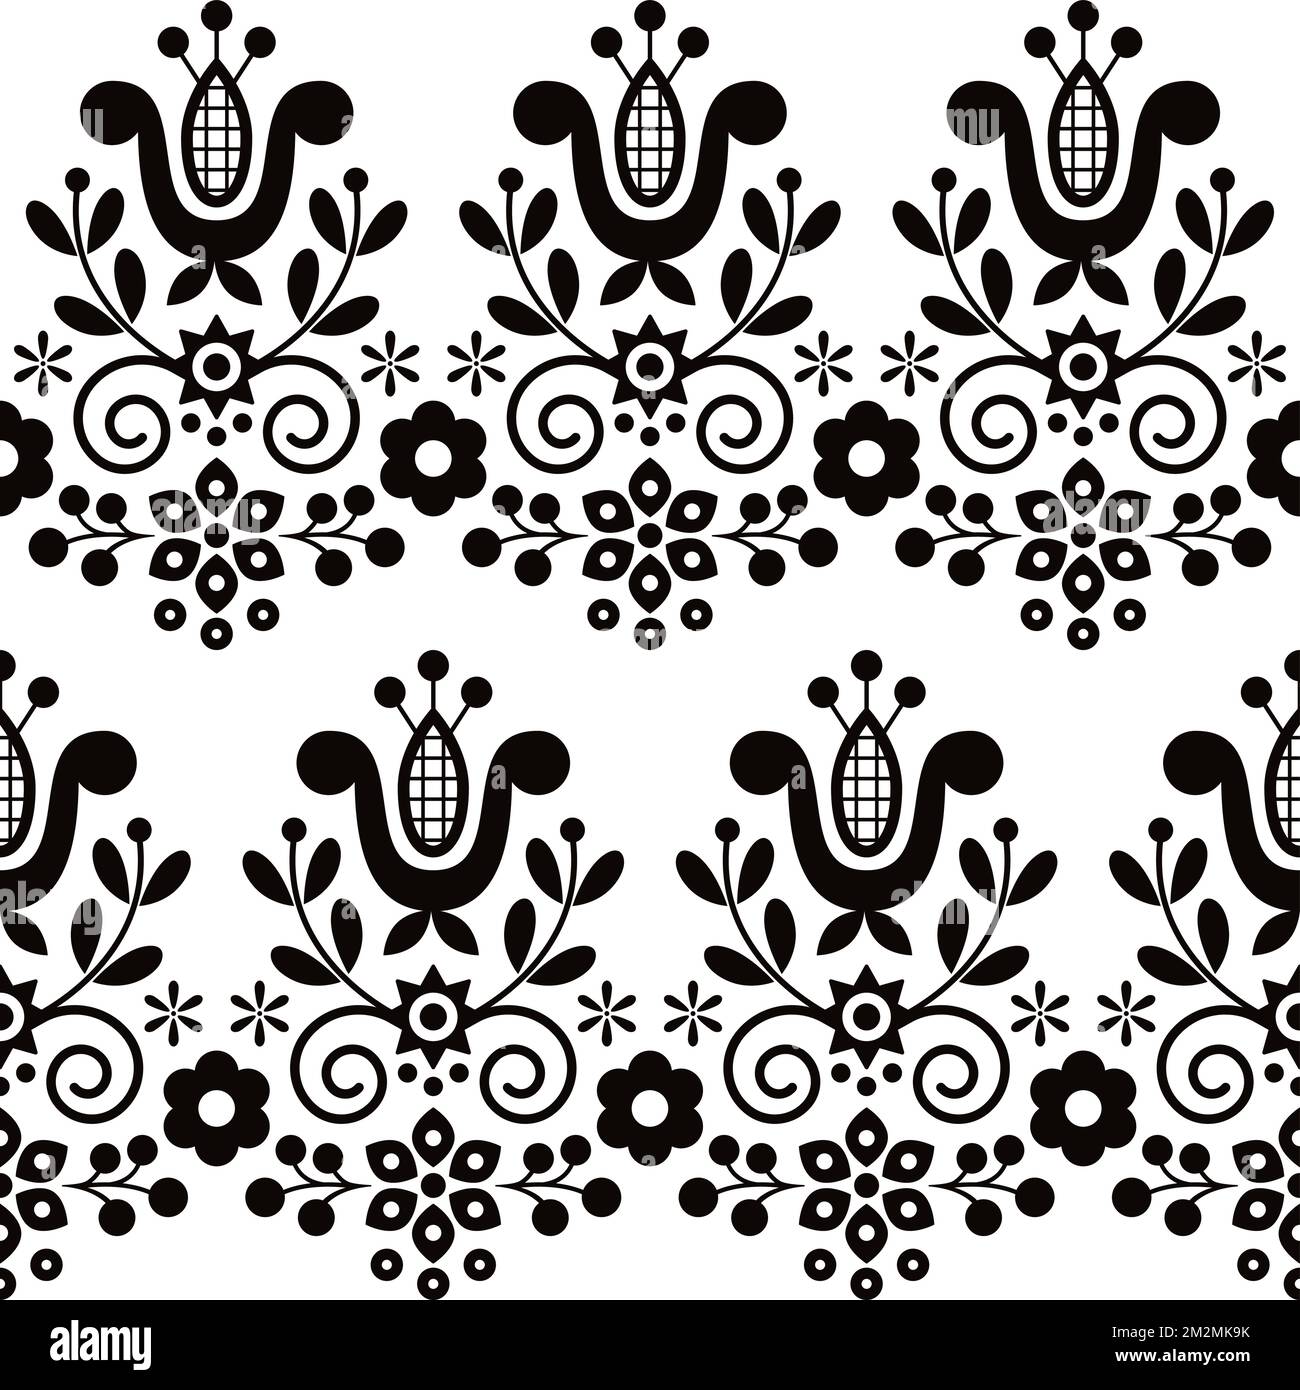 Rural Polish traditional vector seamless pattern, floral decorative folk art embroidery Lachy Sadeckie - black and white textile or fabric print ornam Stock Vector